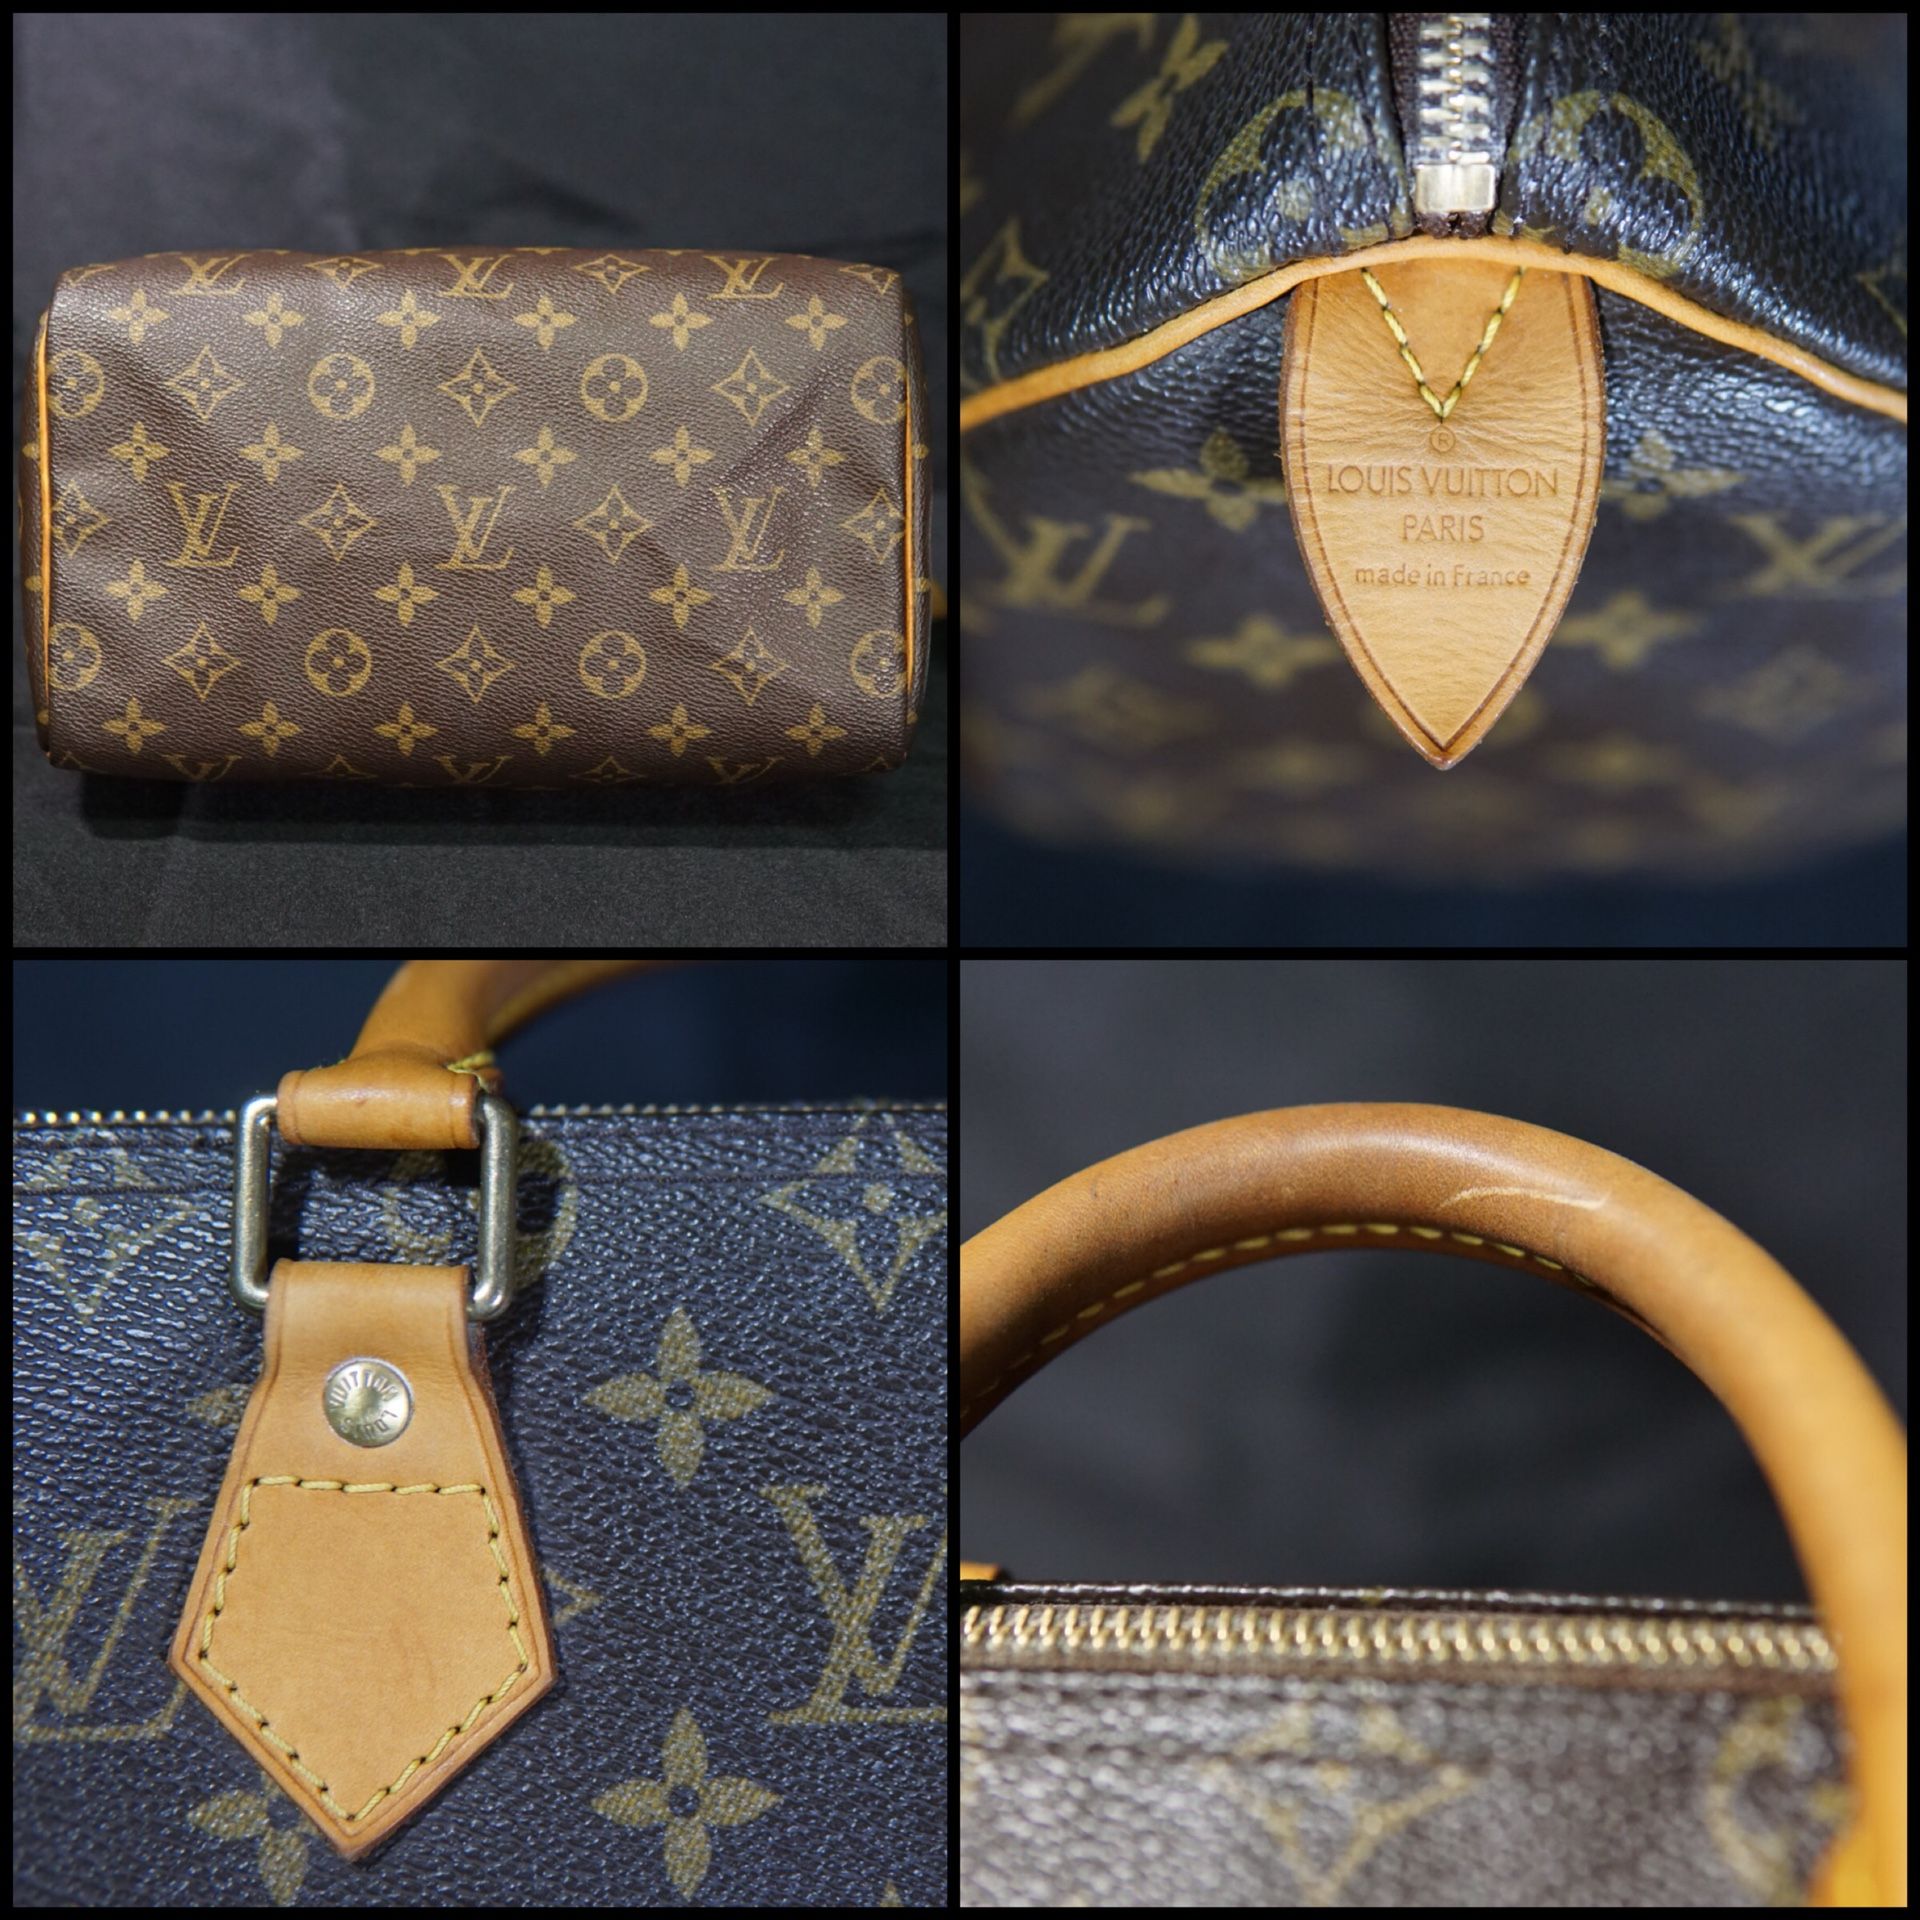 AUTHENTIC Louis Vuitton Speedy 35 for Sale in Adelanto, CA - OfferUp